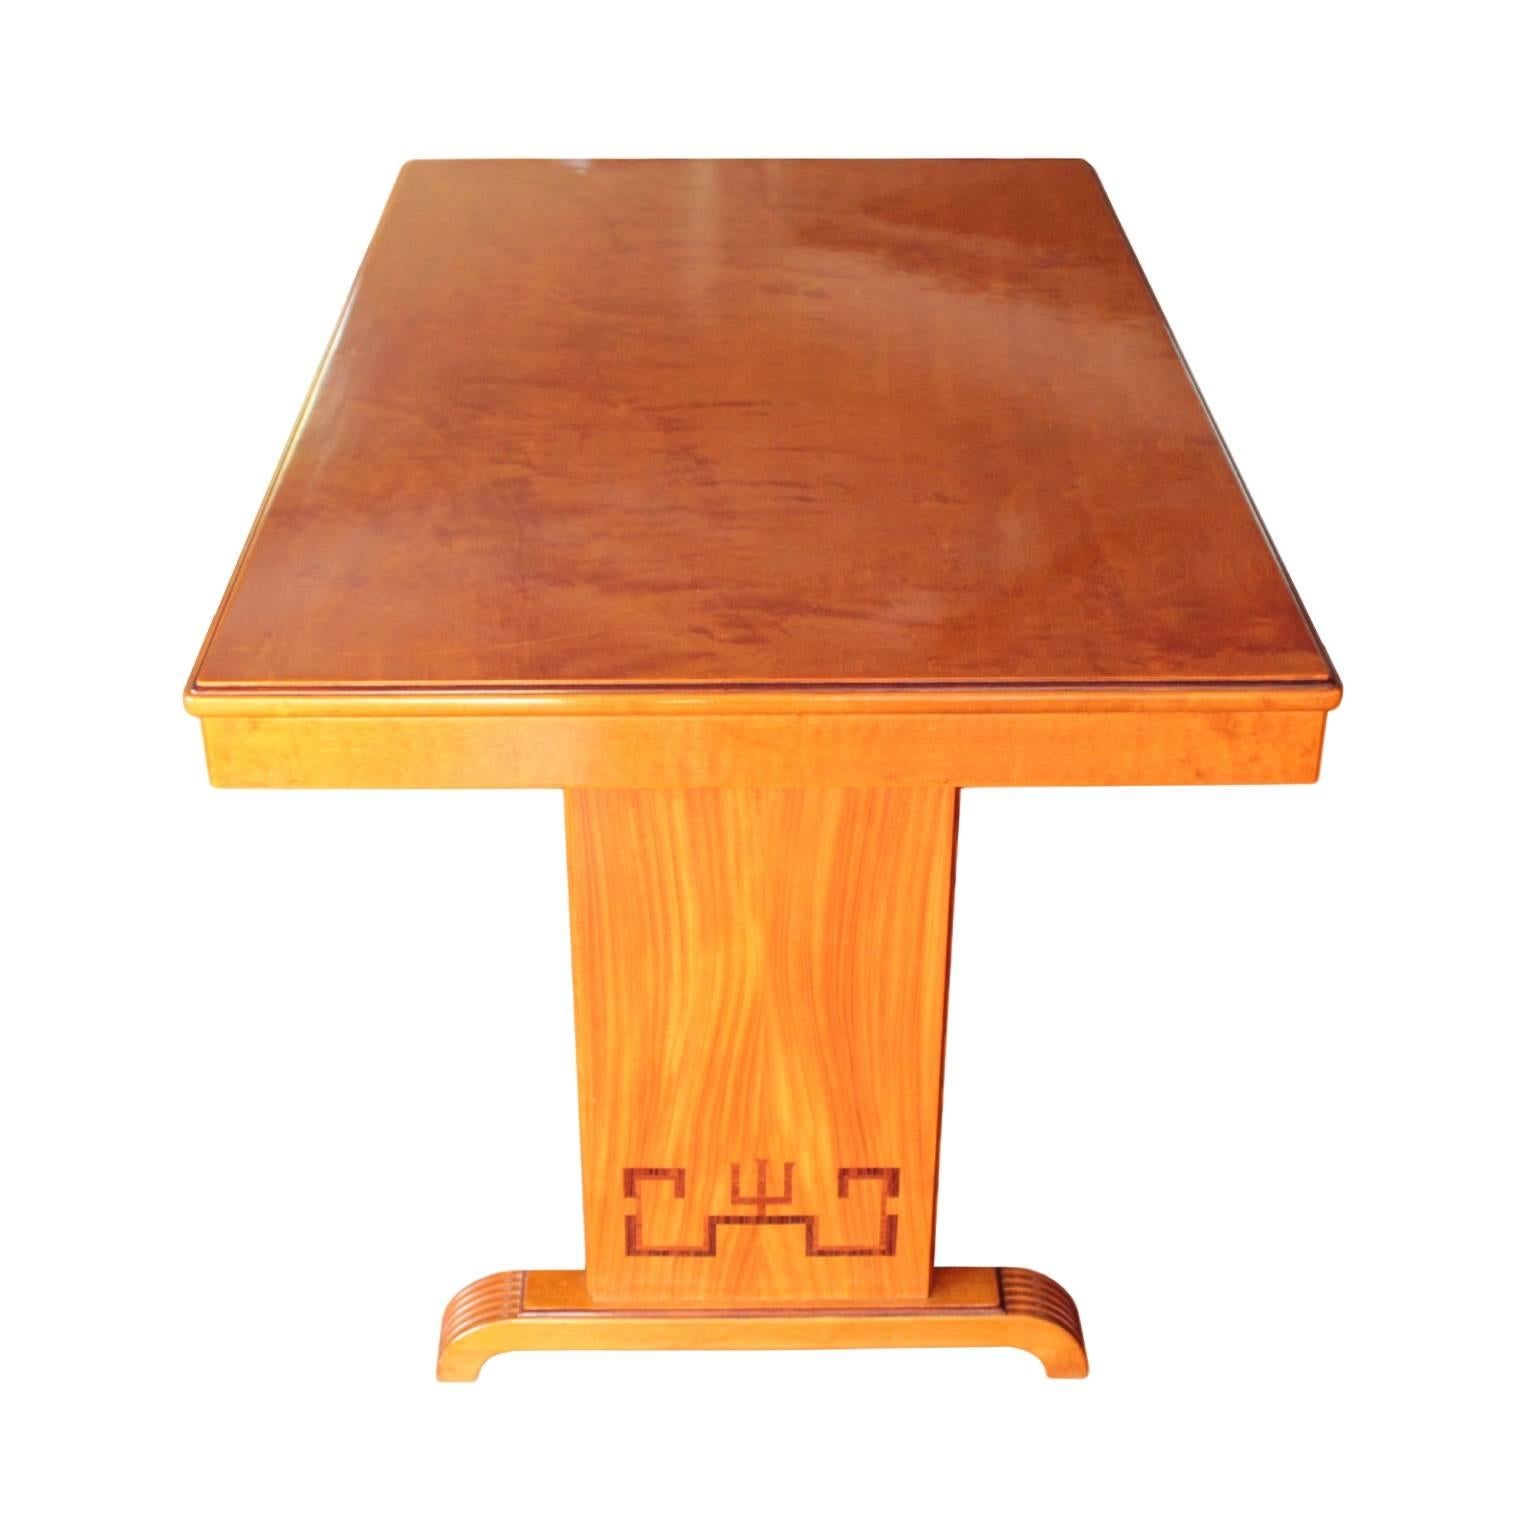 Versatile table in flame birch having a rectngular top with accented molding resting on a pair of rectangular panel pedestals in book-matched elm decorated with stylized meander inlays in palisander and rosewood. Raised on a pair of 